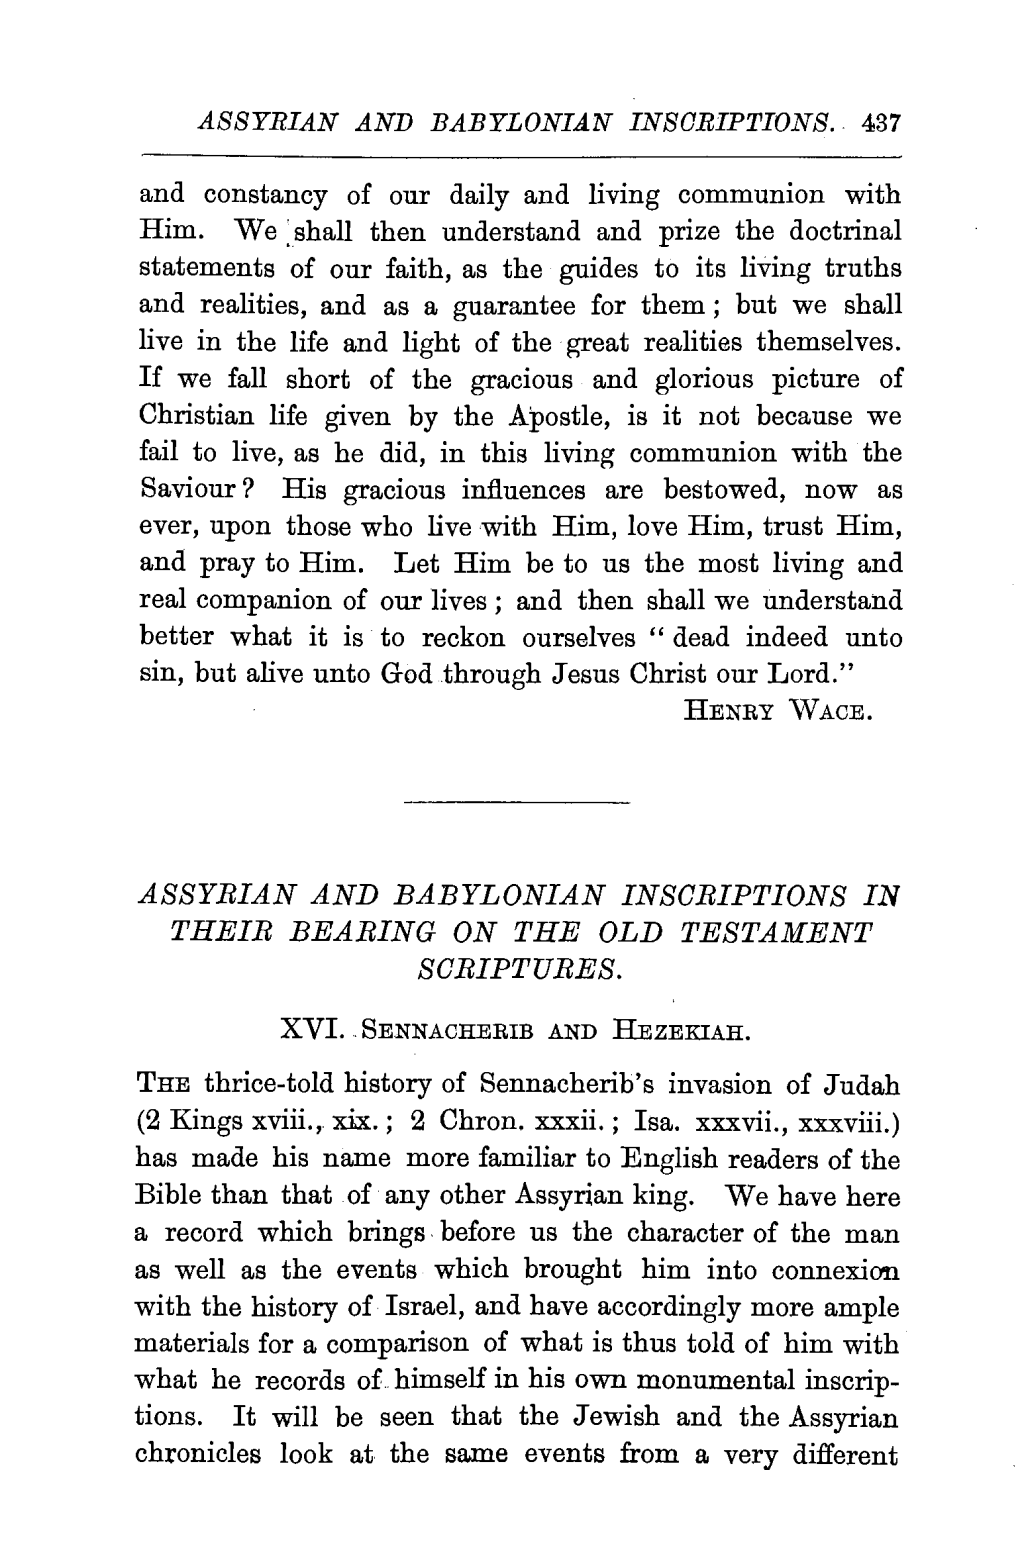 Assyrian and Babylonian Inscriptions in Their Bearing on the Old Testament Scriptures